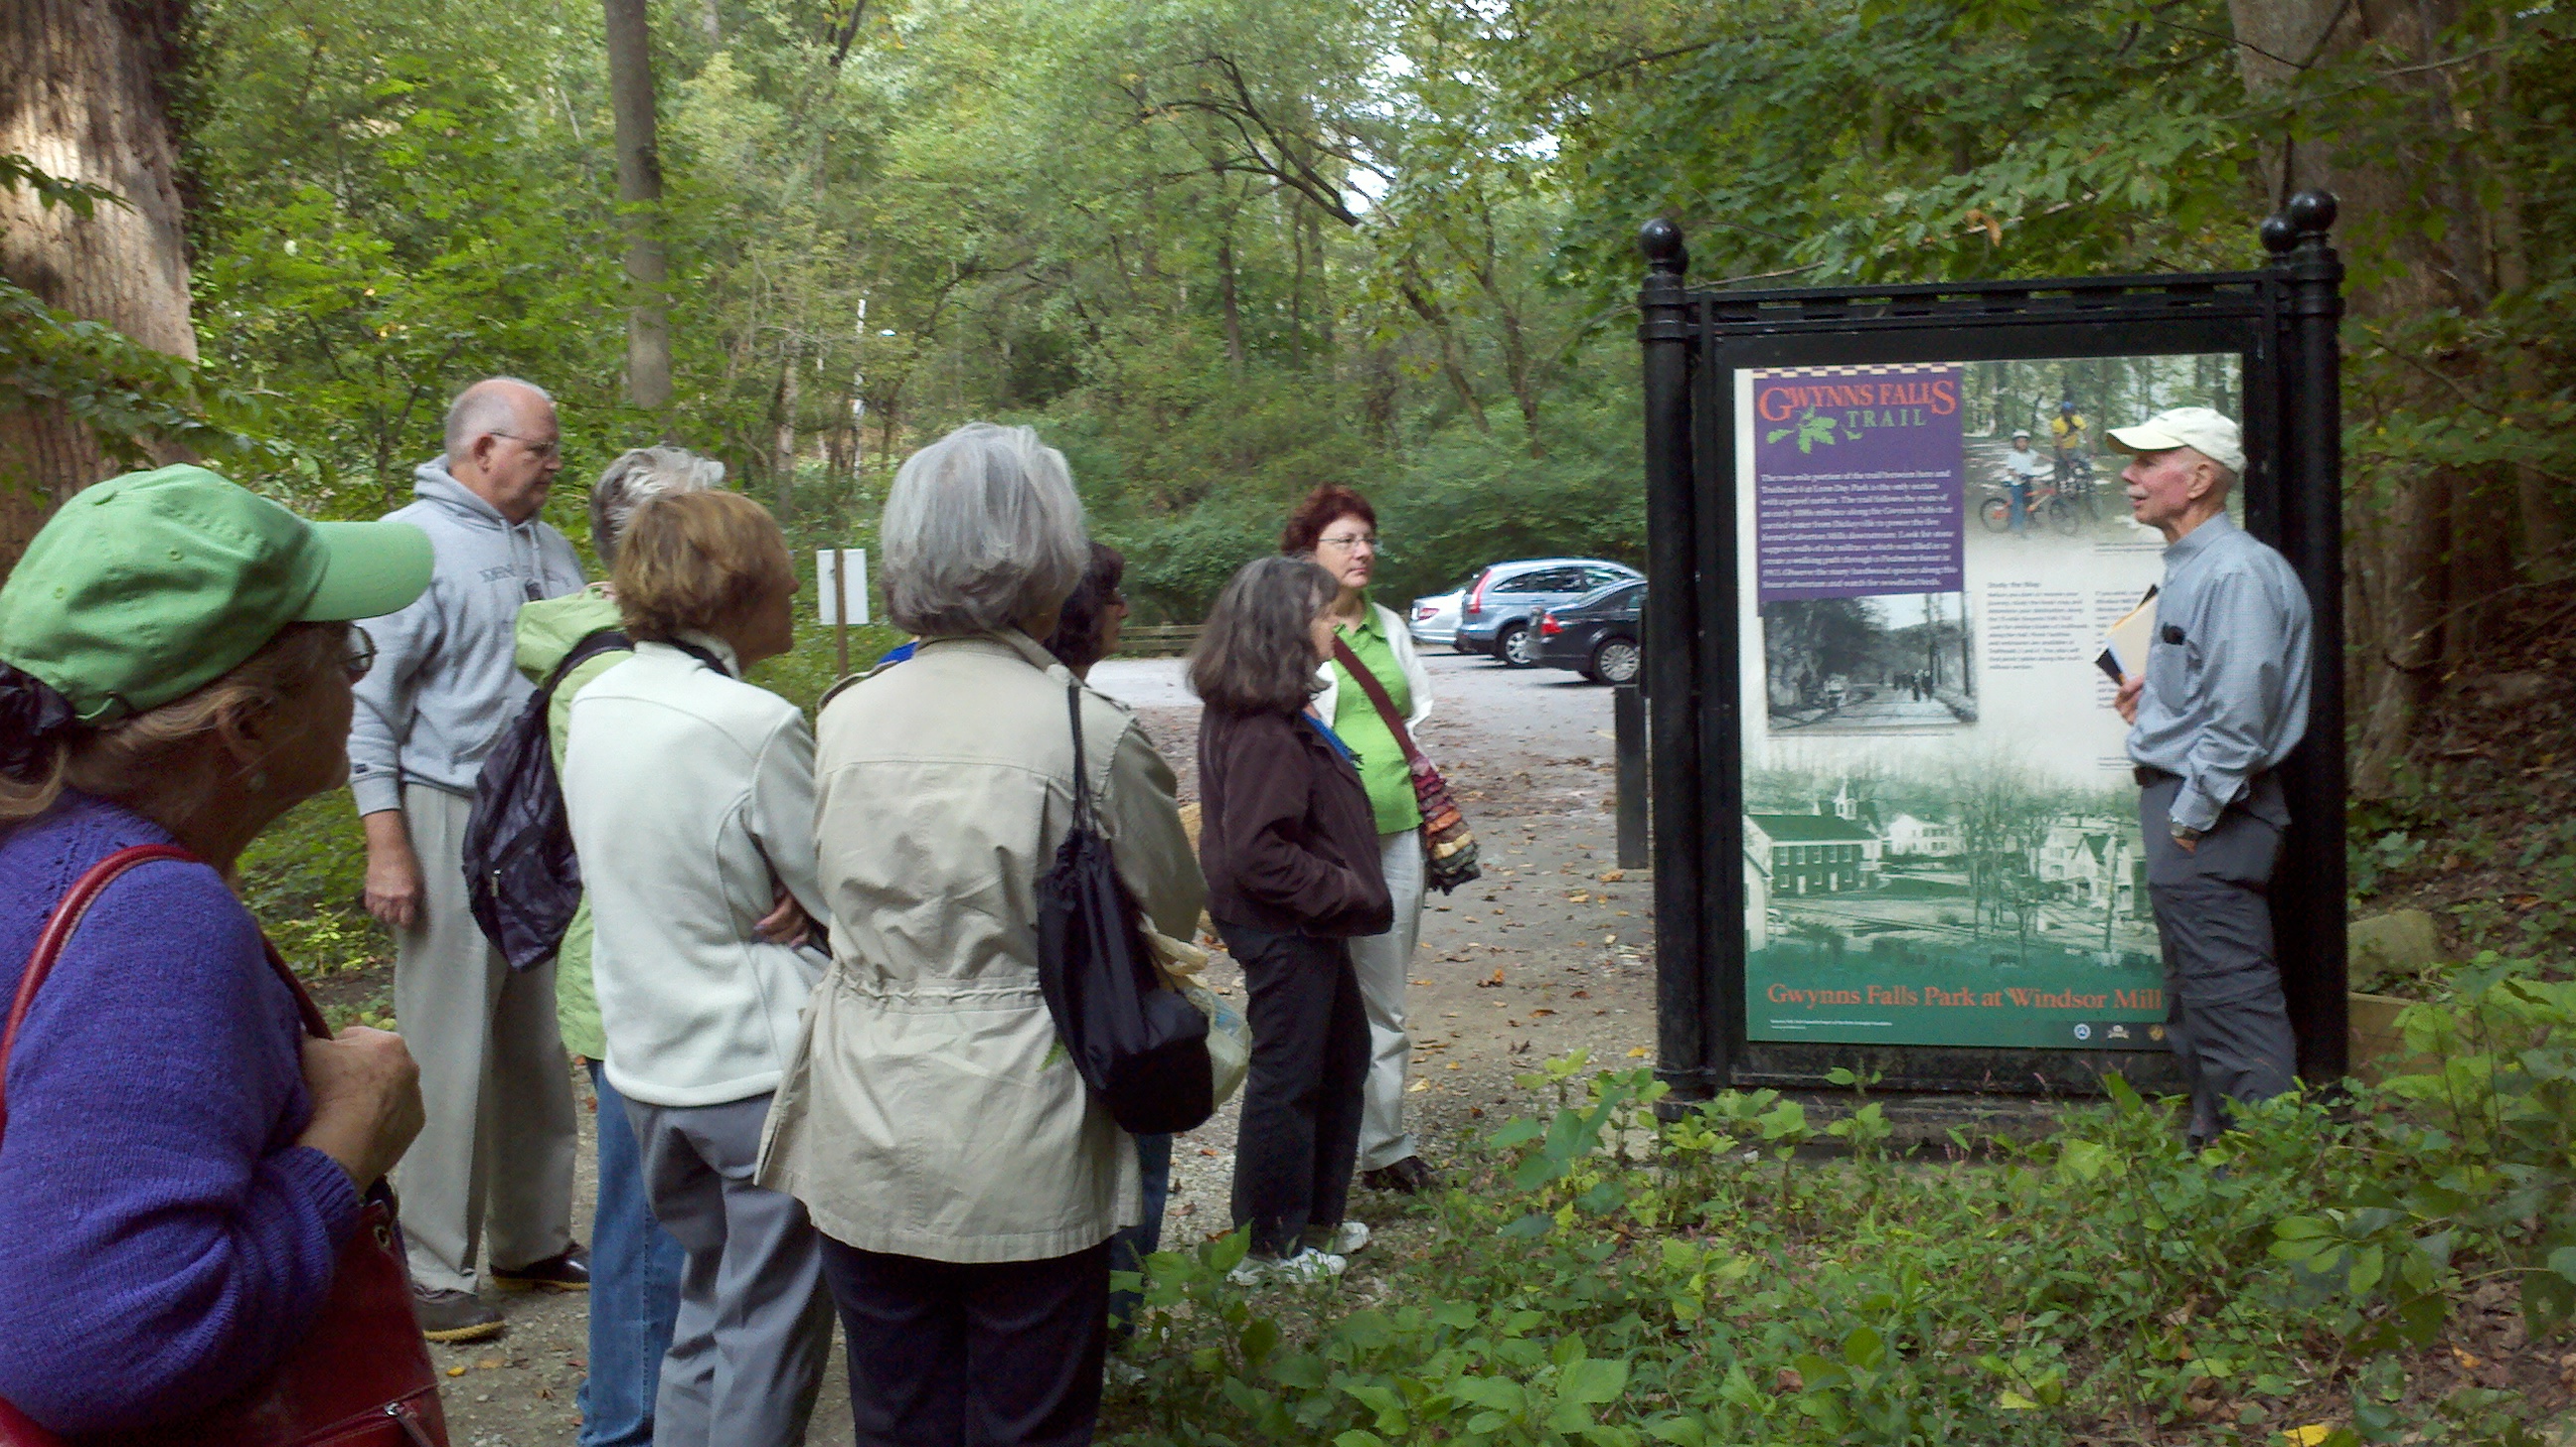 Ed Orser leading a tour of the Gwynns Falls Trail for students in the 2013 Odyssey course.